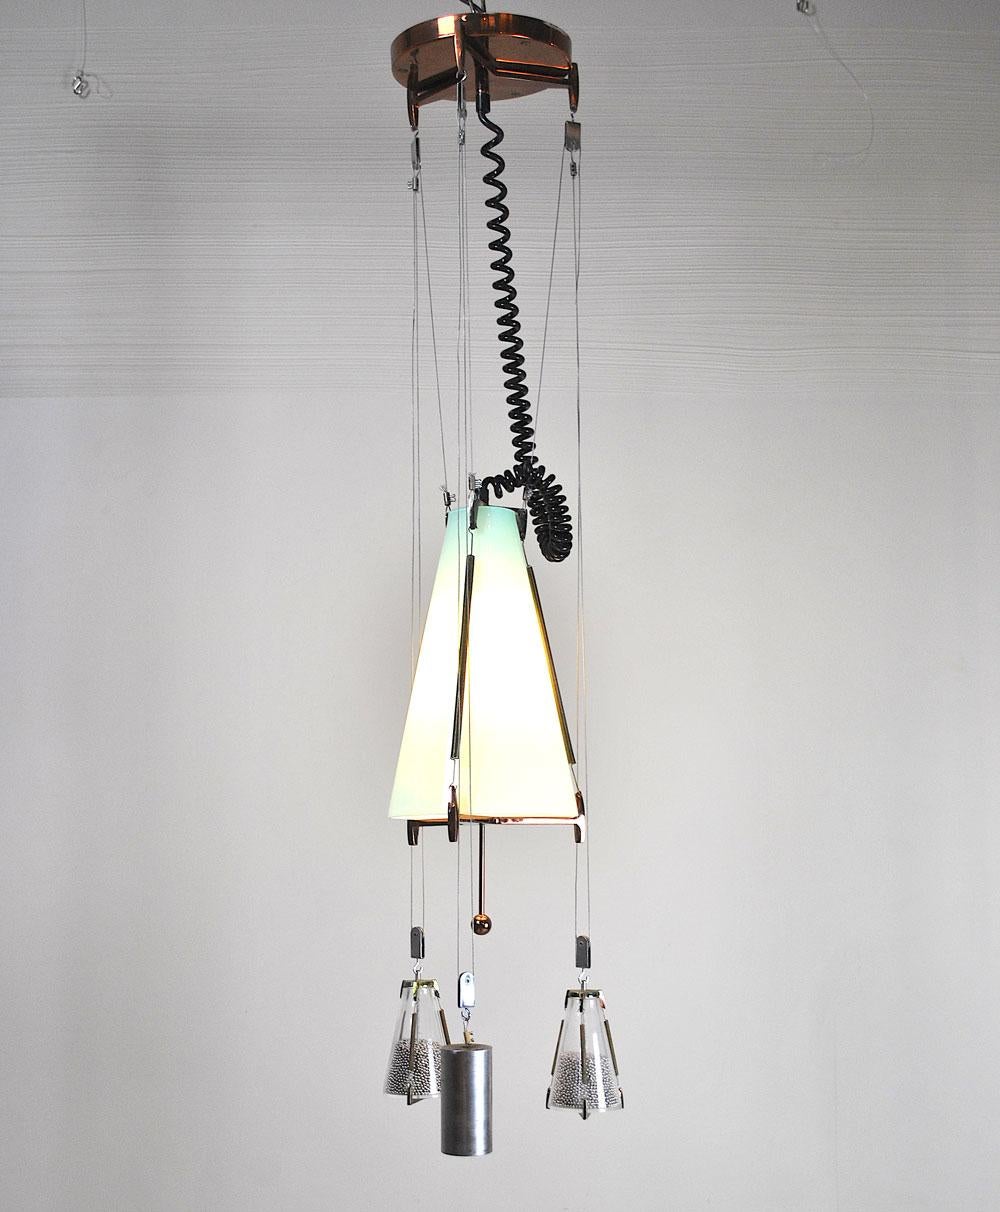 Mid-Century Modern Italian Midcentury Chandelier in the Atomic Style from the 1950s For Sale